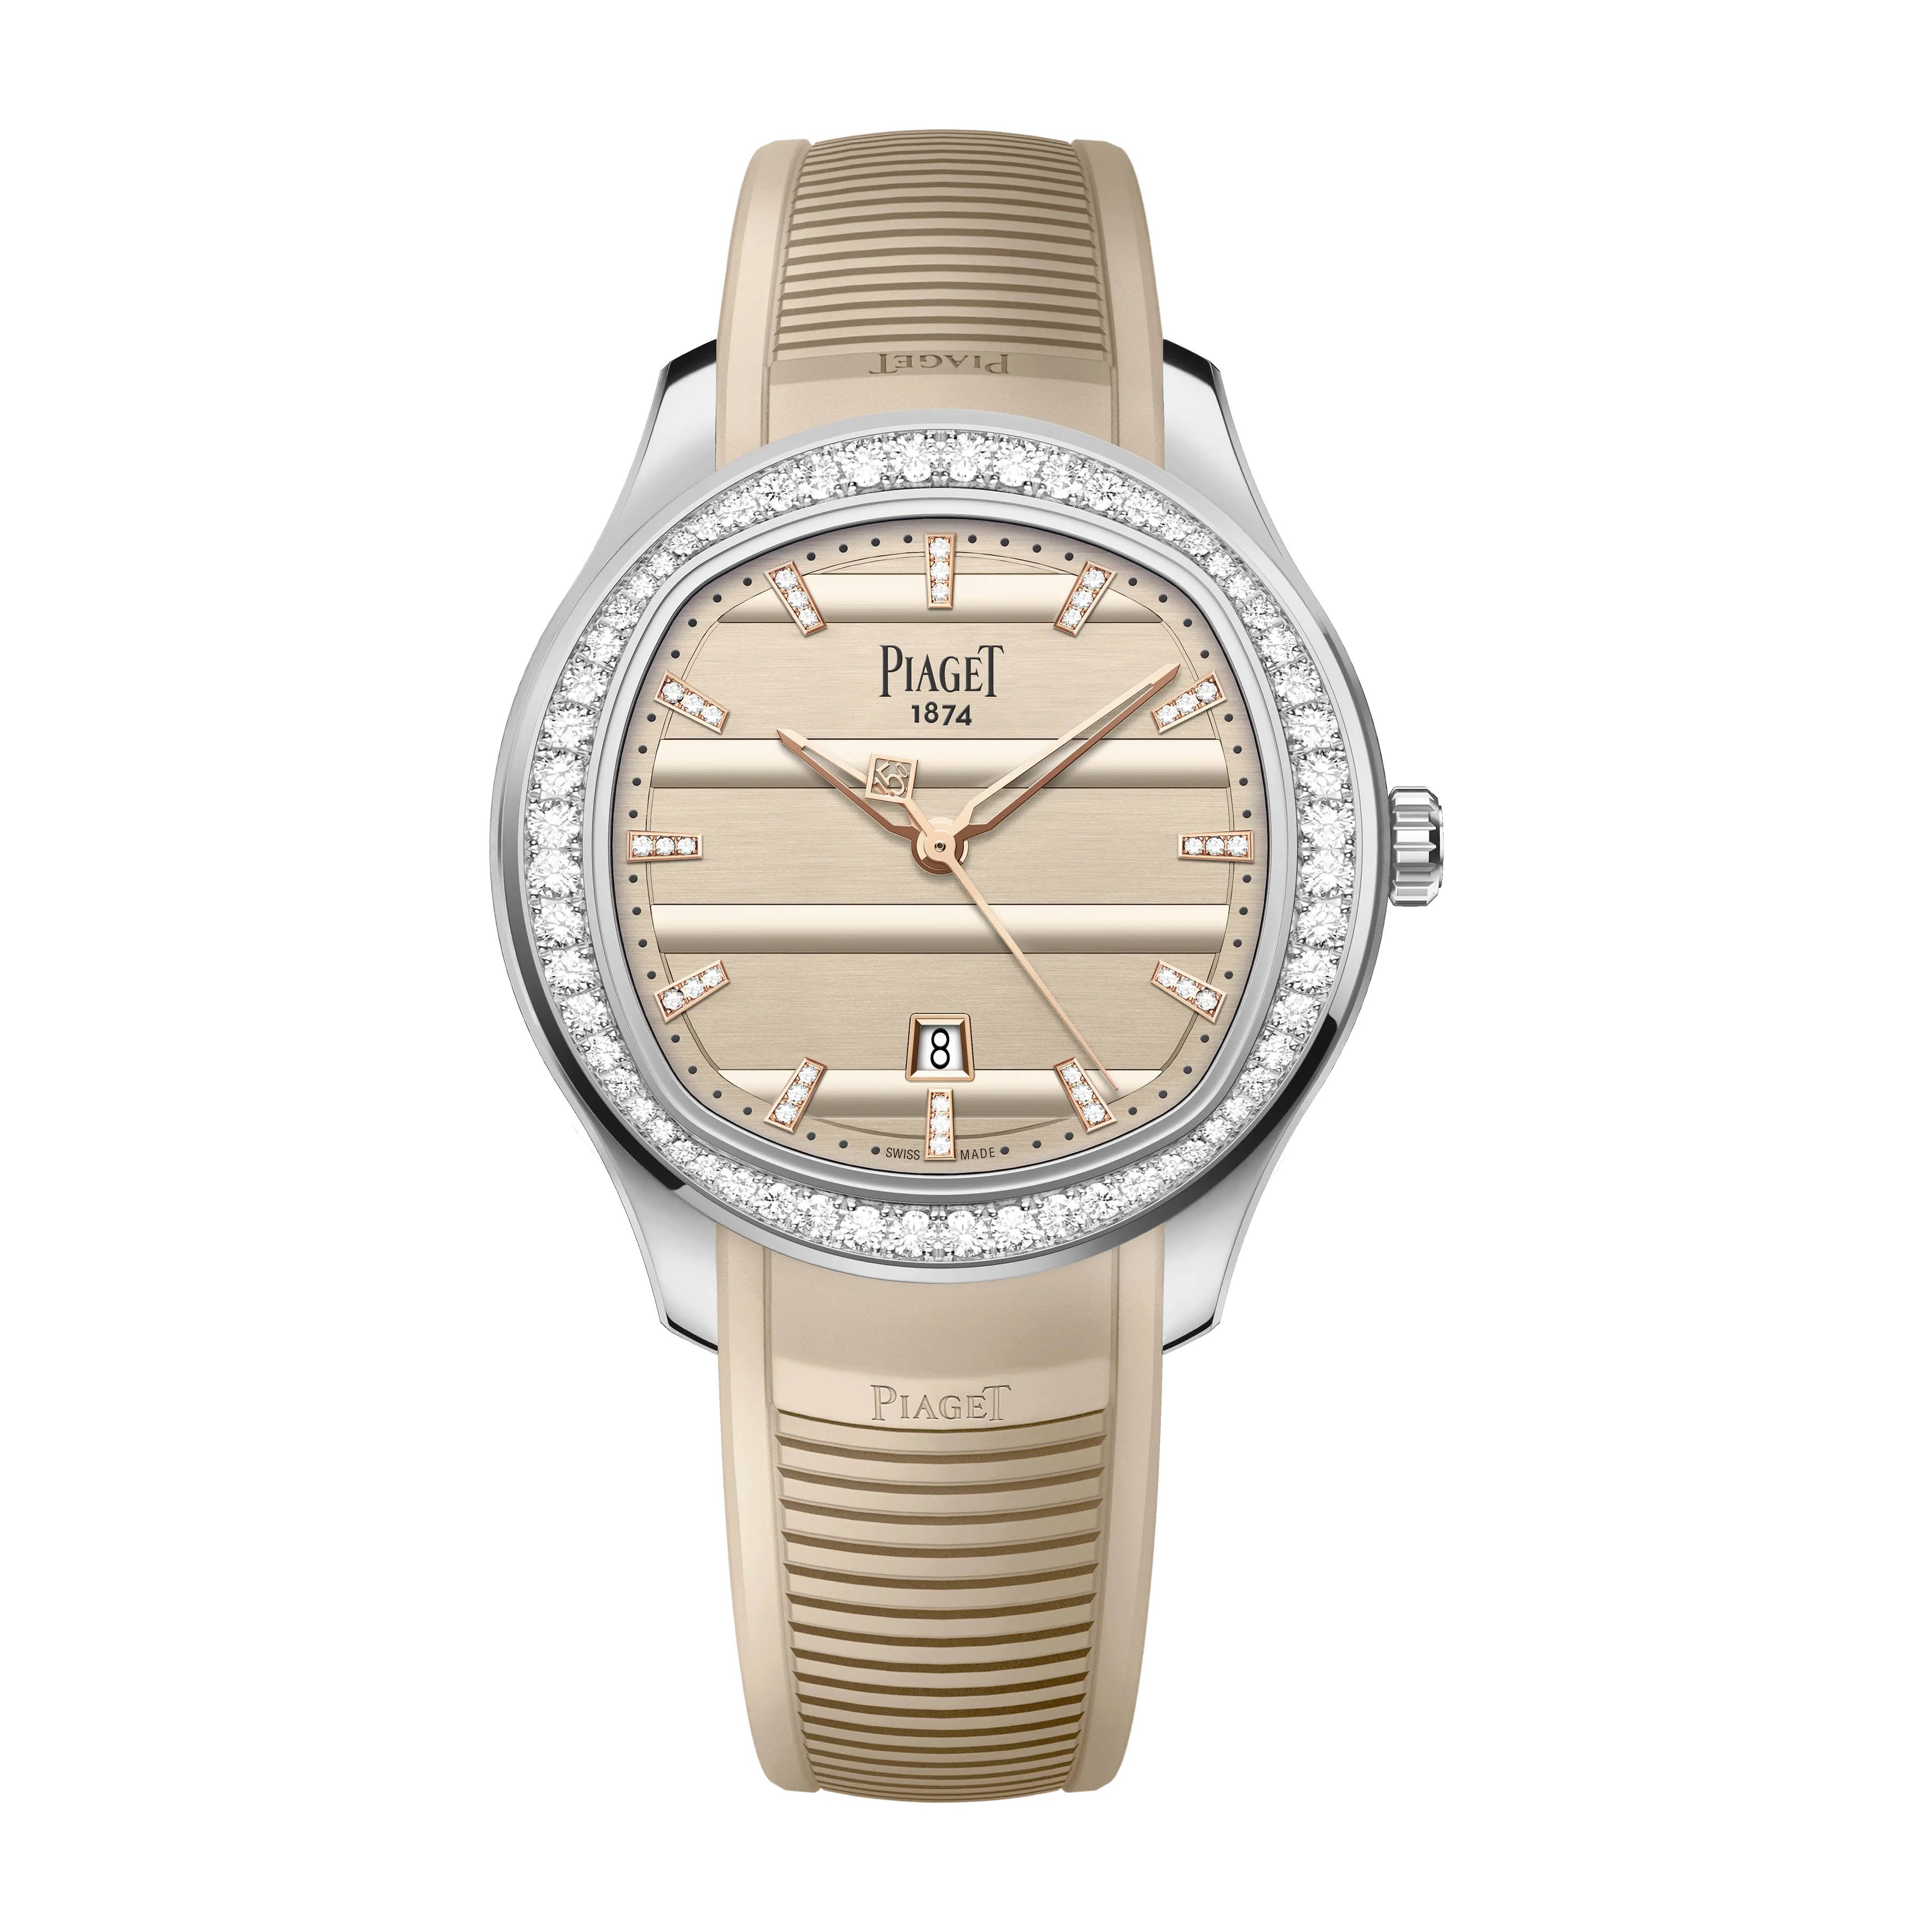 Piaget Polo Date 150th Anniversary Watch, 36mm Tan Dial, G0A49028